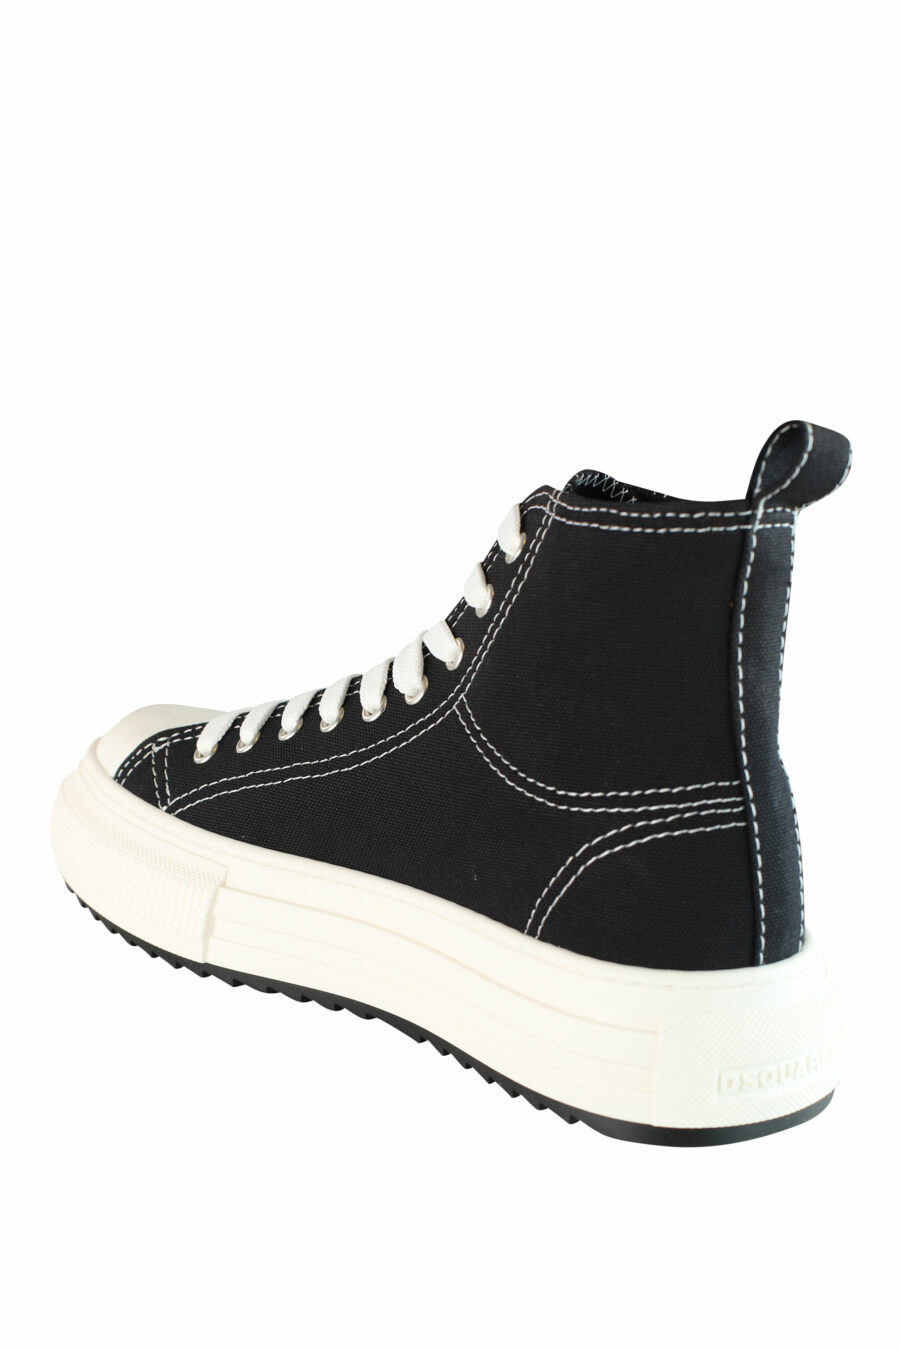 Black bootie style trainers with platform and mini logo - IMG 1423